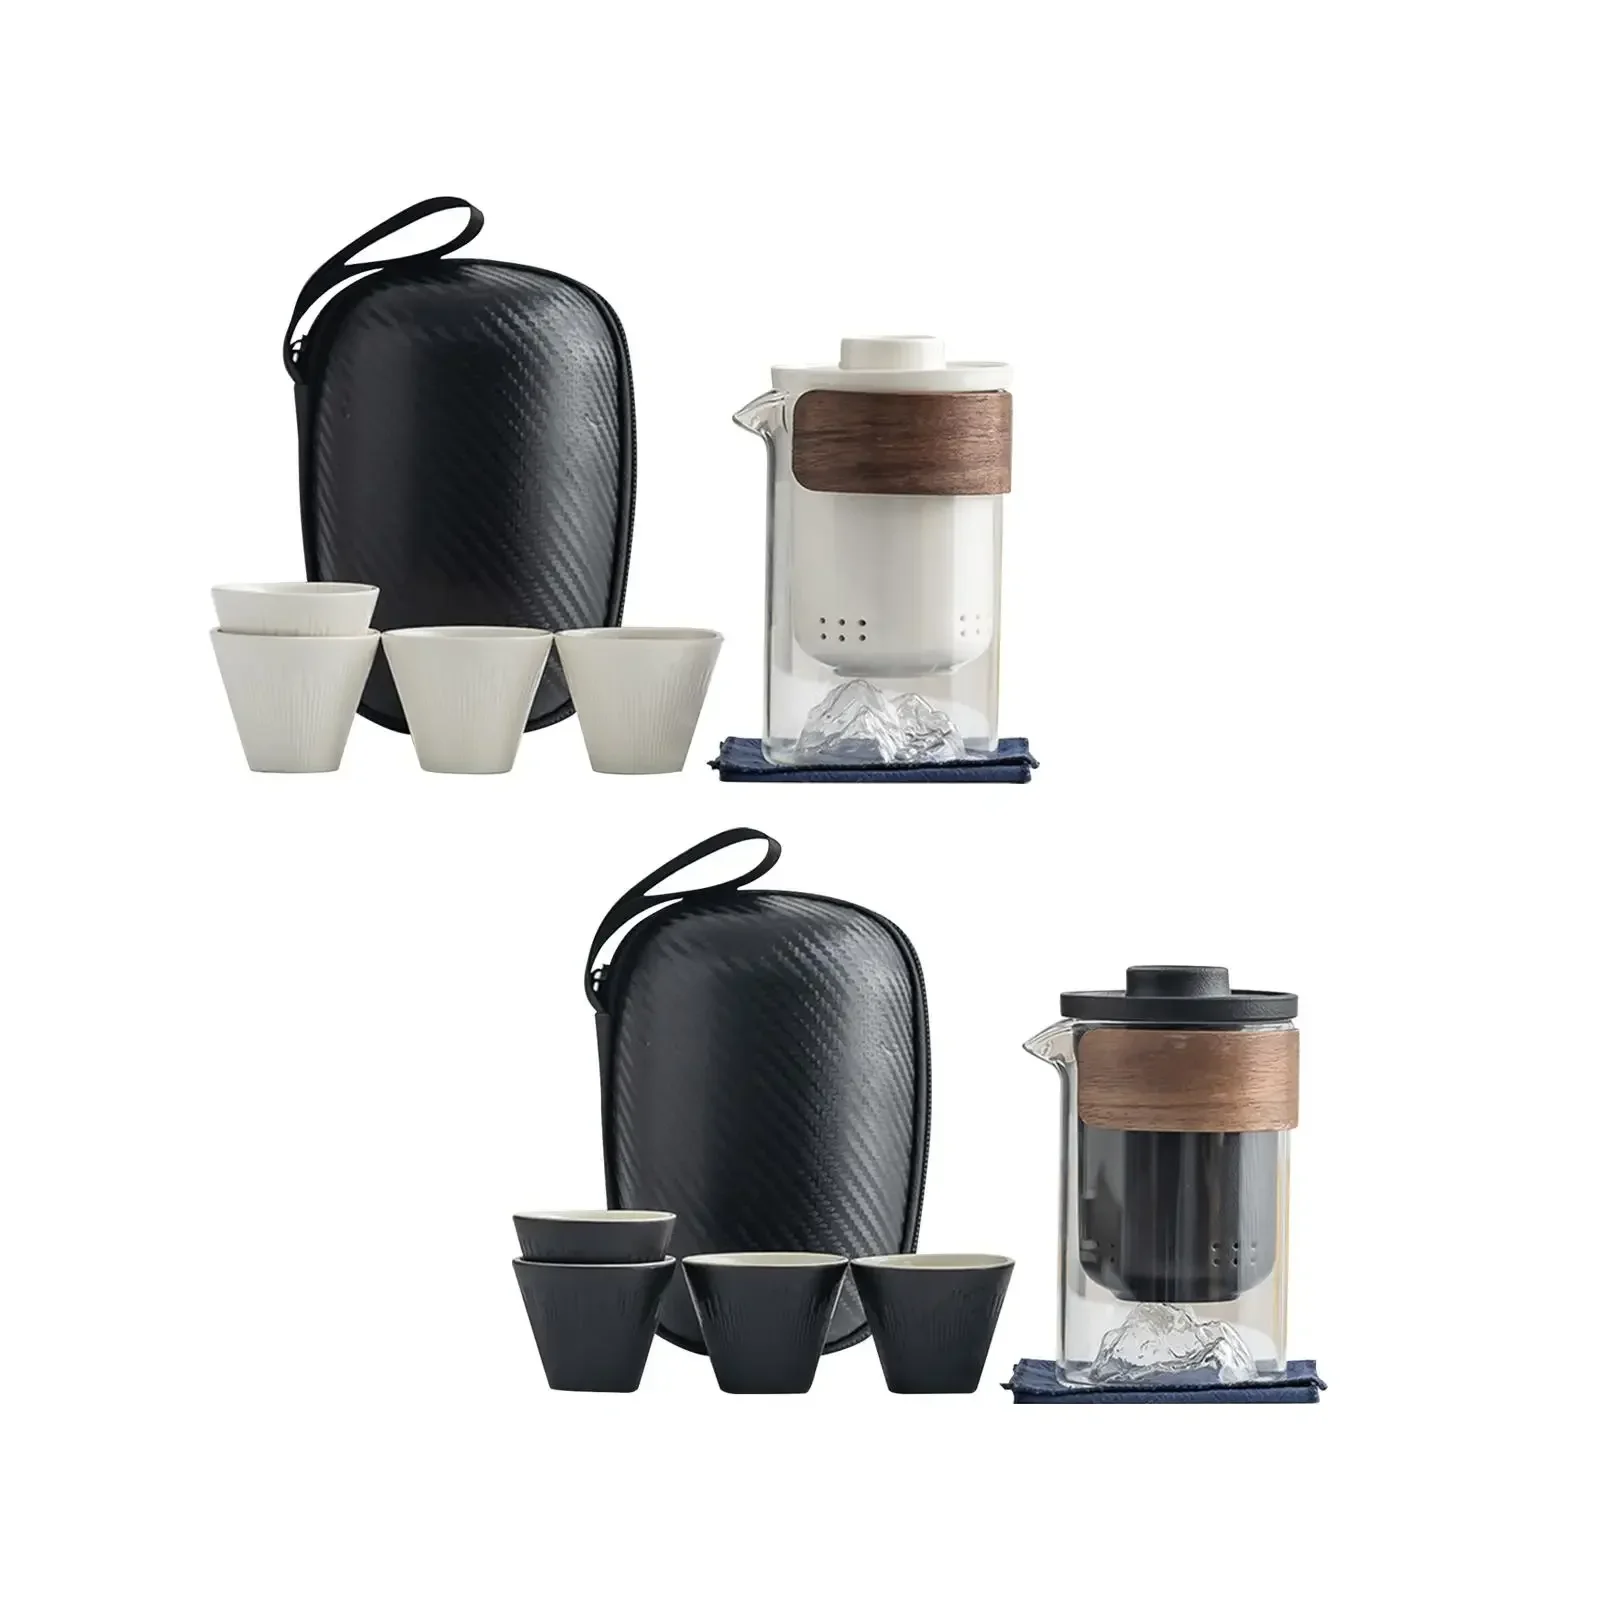 

4 Loose For Mini Friends Infuser Set Travel Tea With Fu Portable Pot 1 Picnic Hotel Hiking Case Outdoors Kung Cups